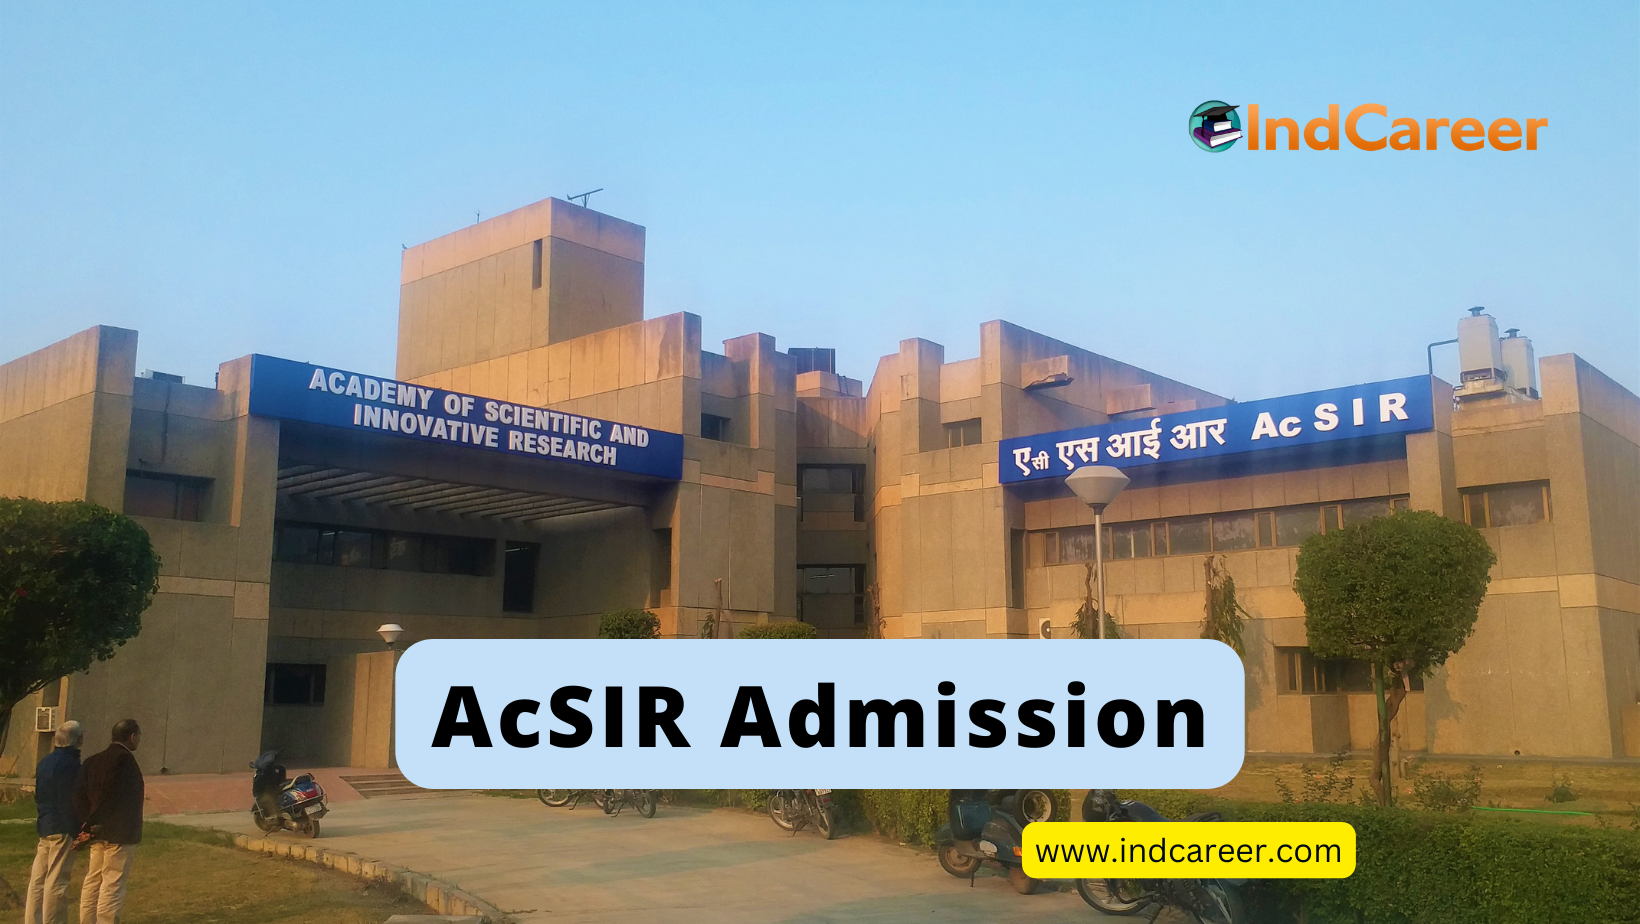 Academy of Scientific and Innovative Research (AcSIR) Admissions